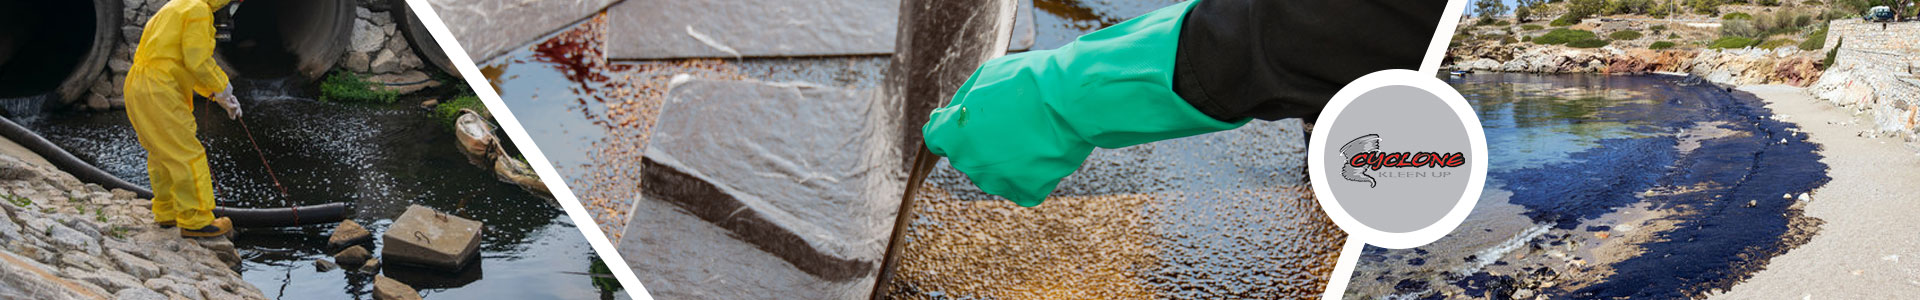 Chemical Spill Cleanup in Pueblo and Colorado Springs, CO